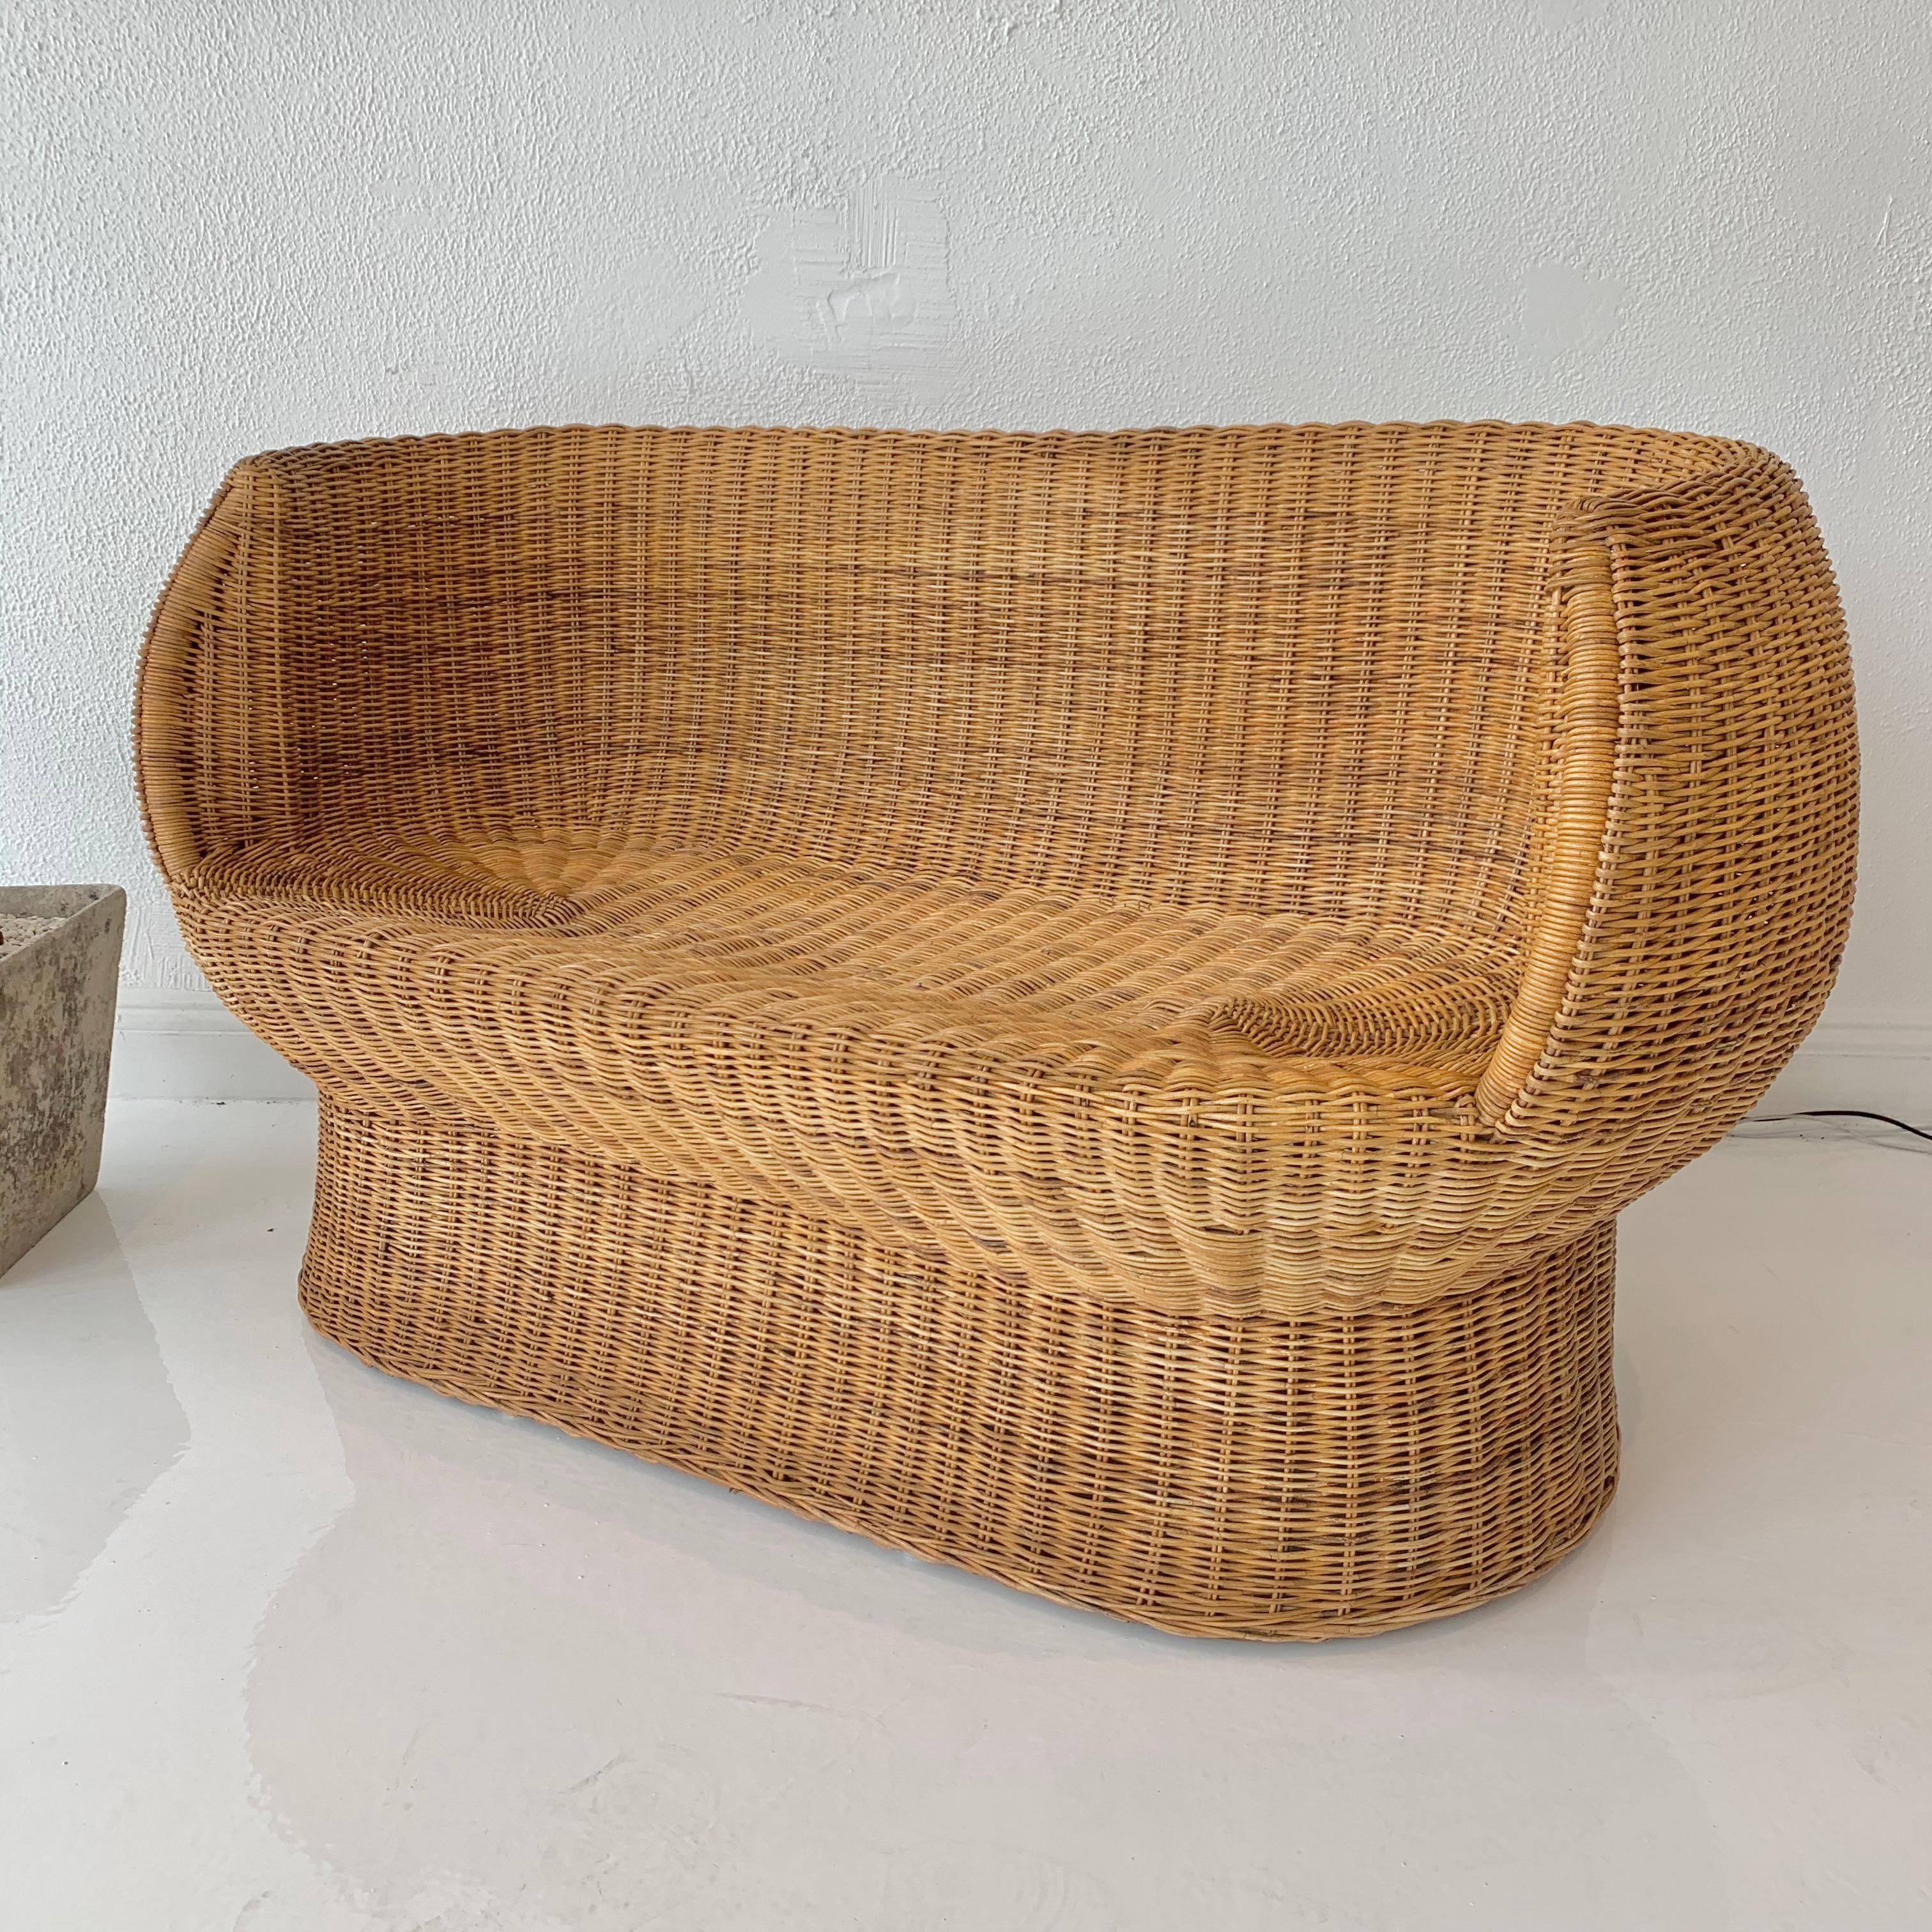 Gorgeous woven wicker settee by Isamu Kenmochi. Perfect scale, and very good condition. Rare, early piece of his work. 
 